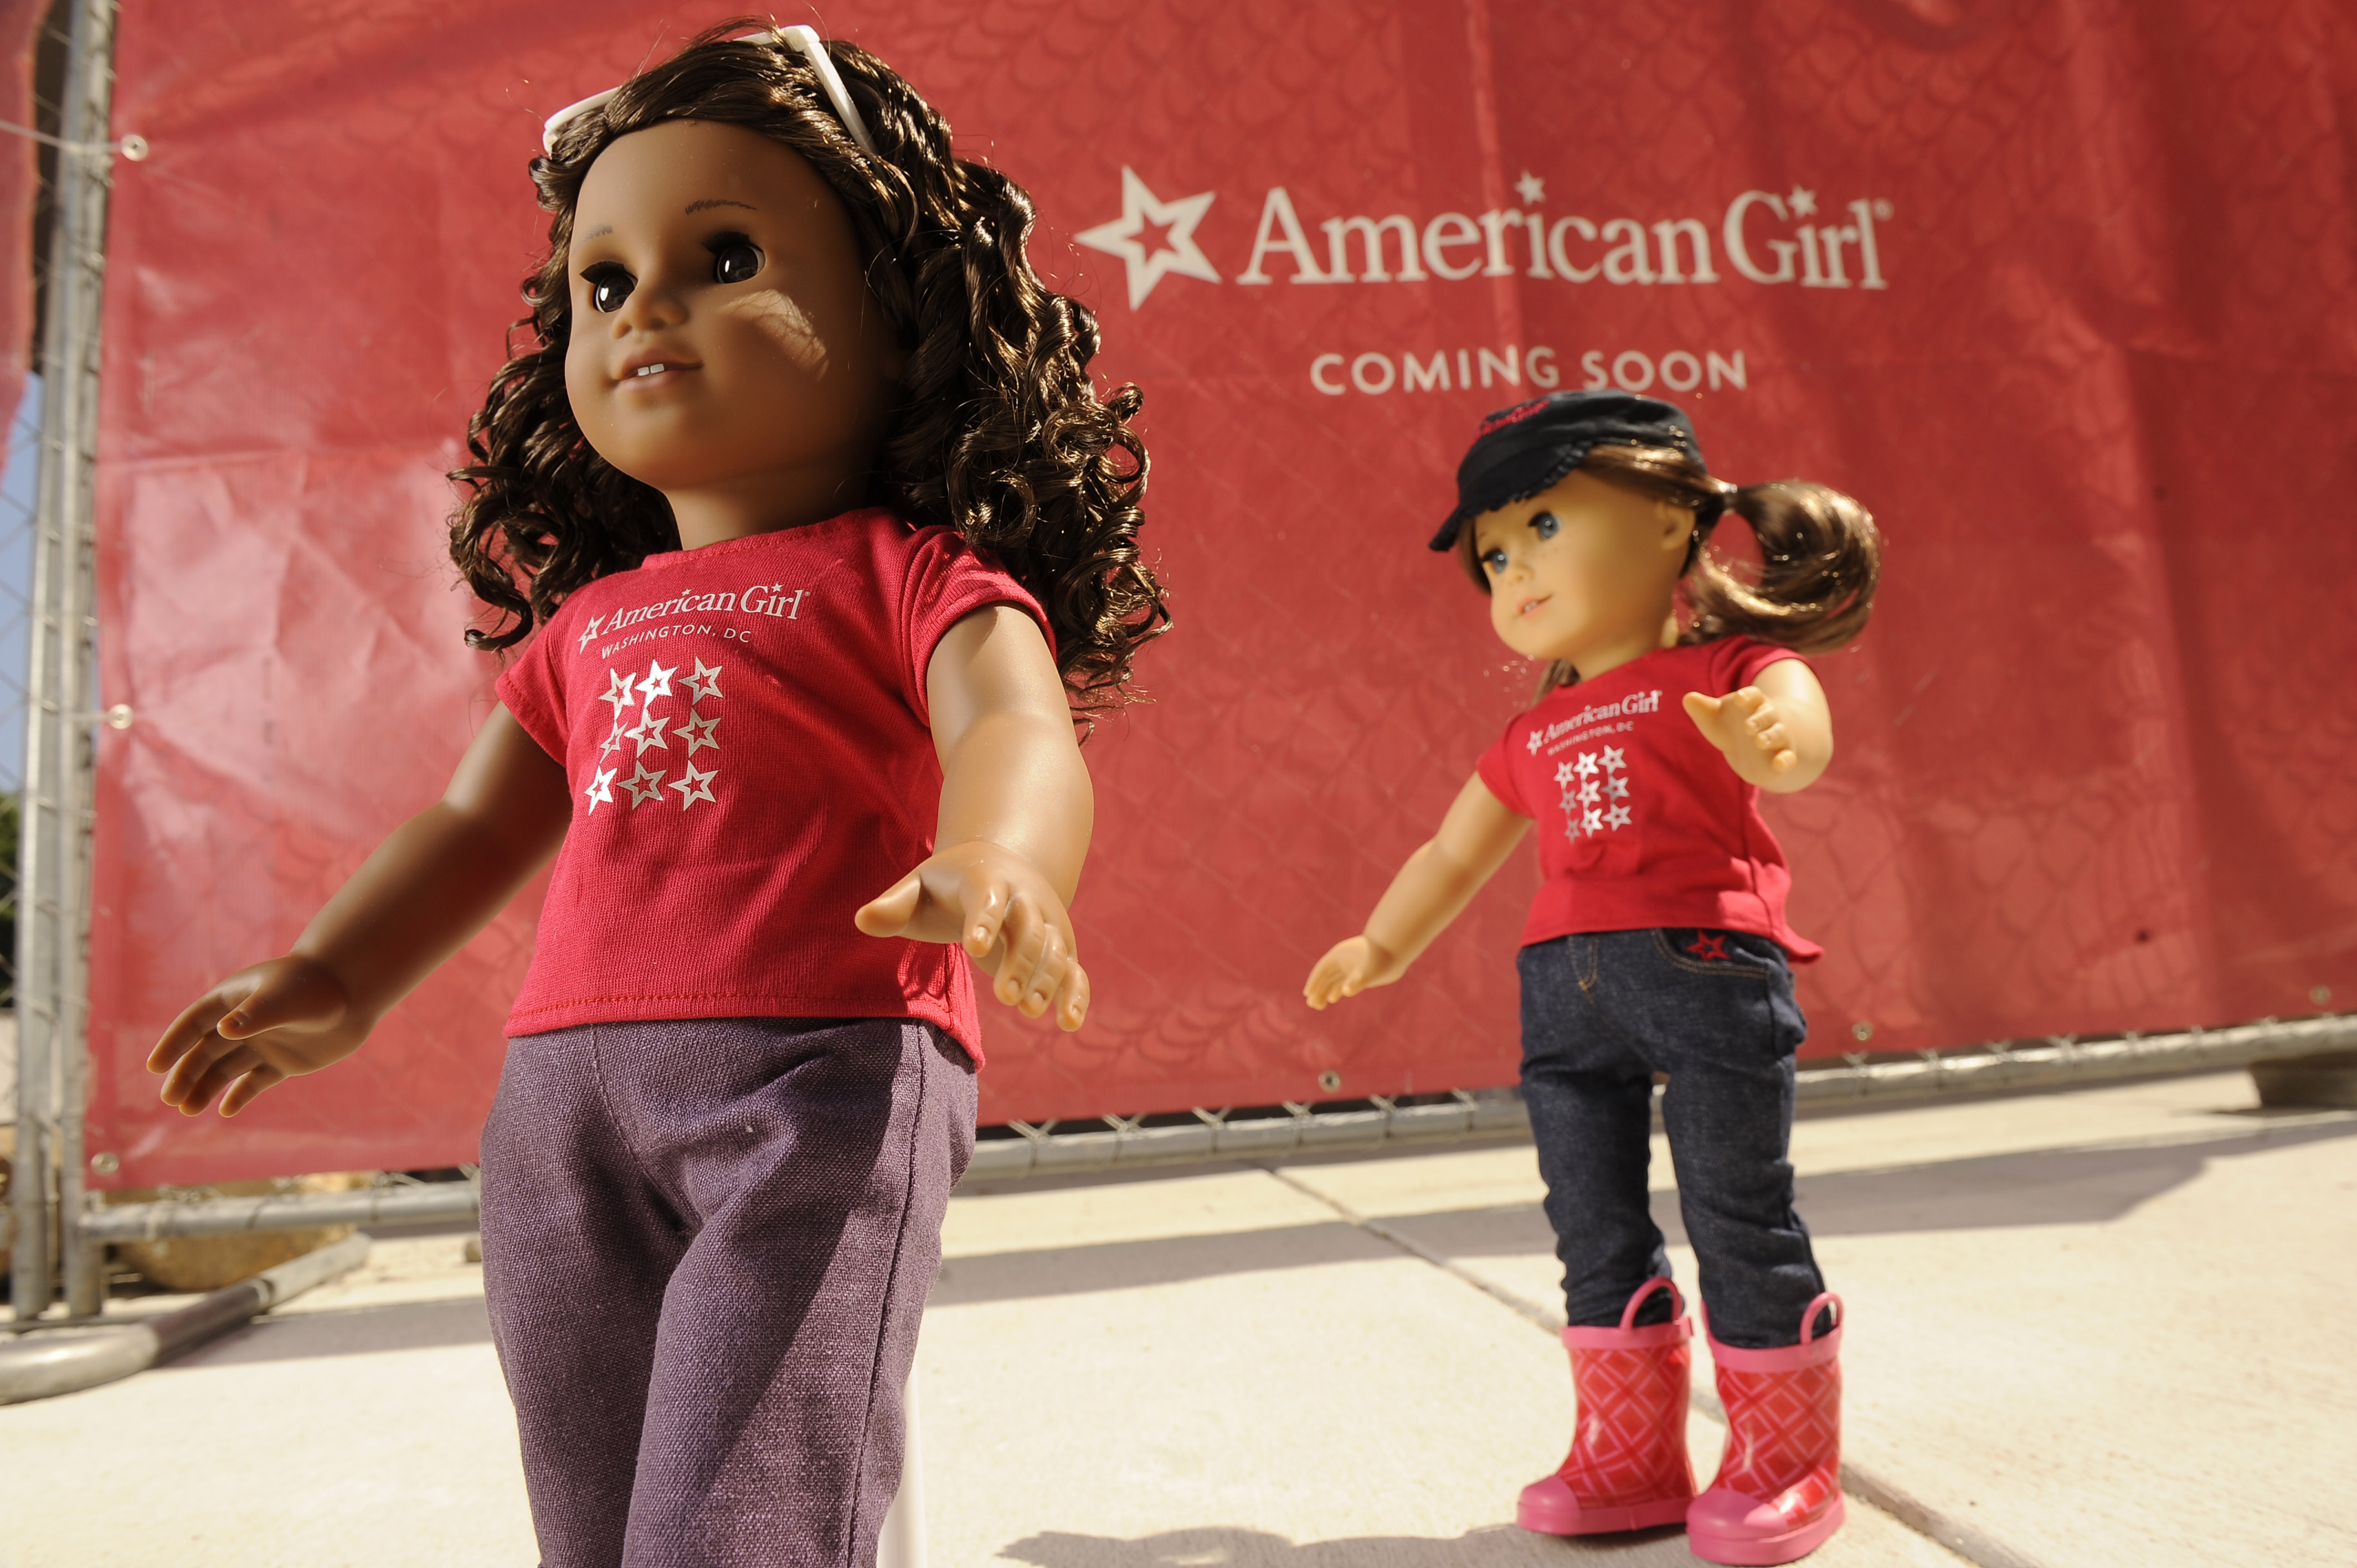 American Girl Dolls Can Be Worth Big Money on the Resale Market